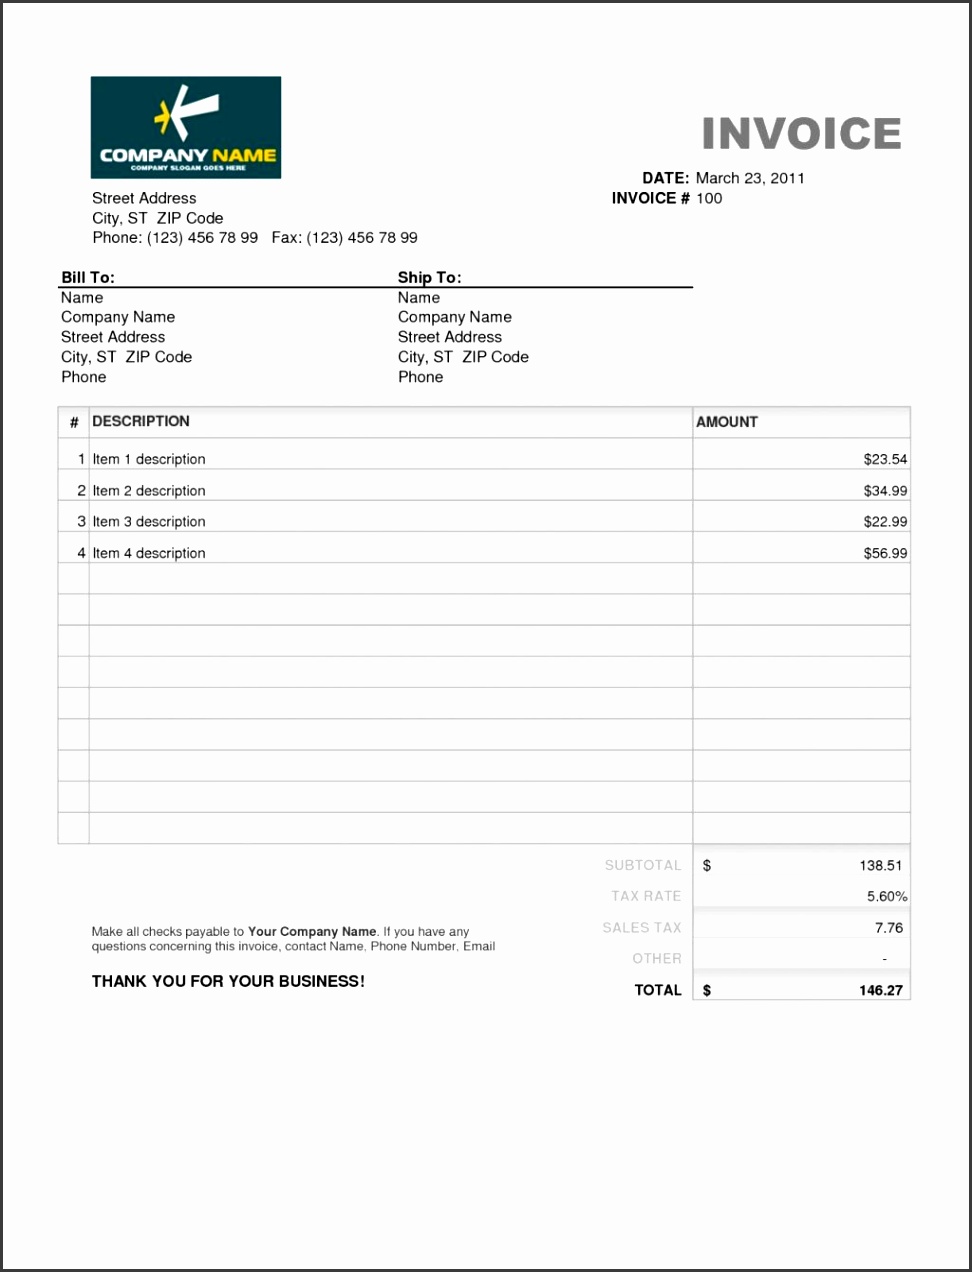 Invoice Sample Uk Gse Bookbinder Co Example Microsoft Wordmplate Free Ms